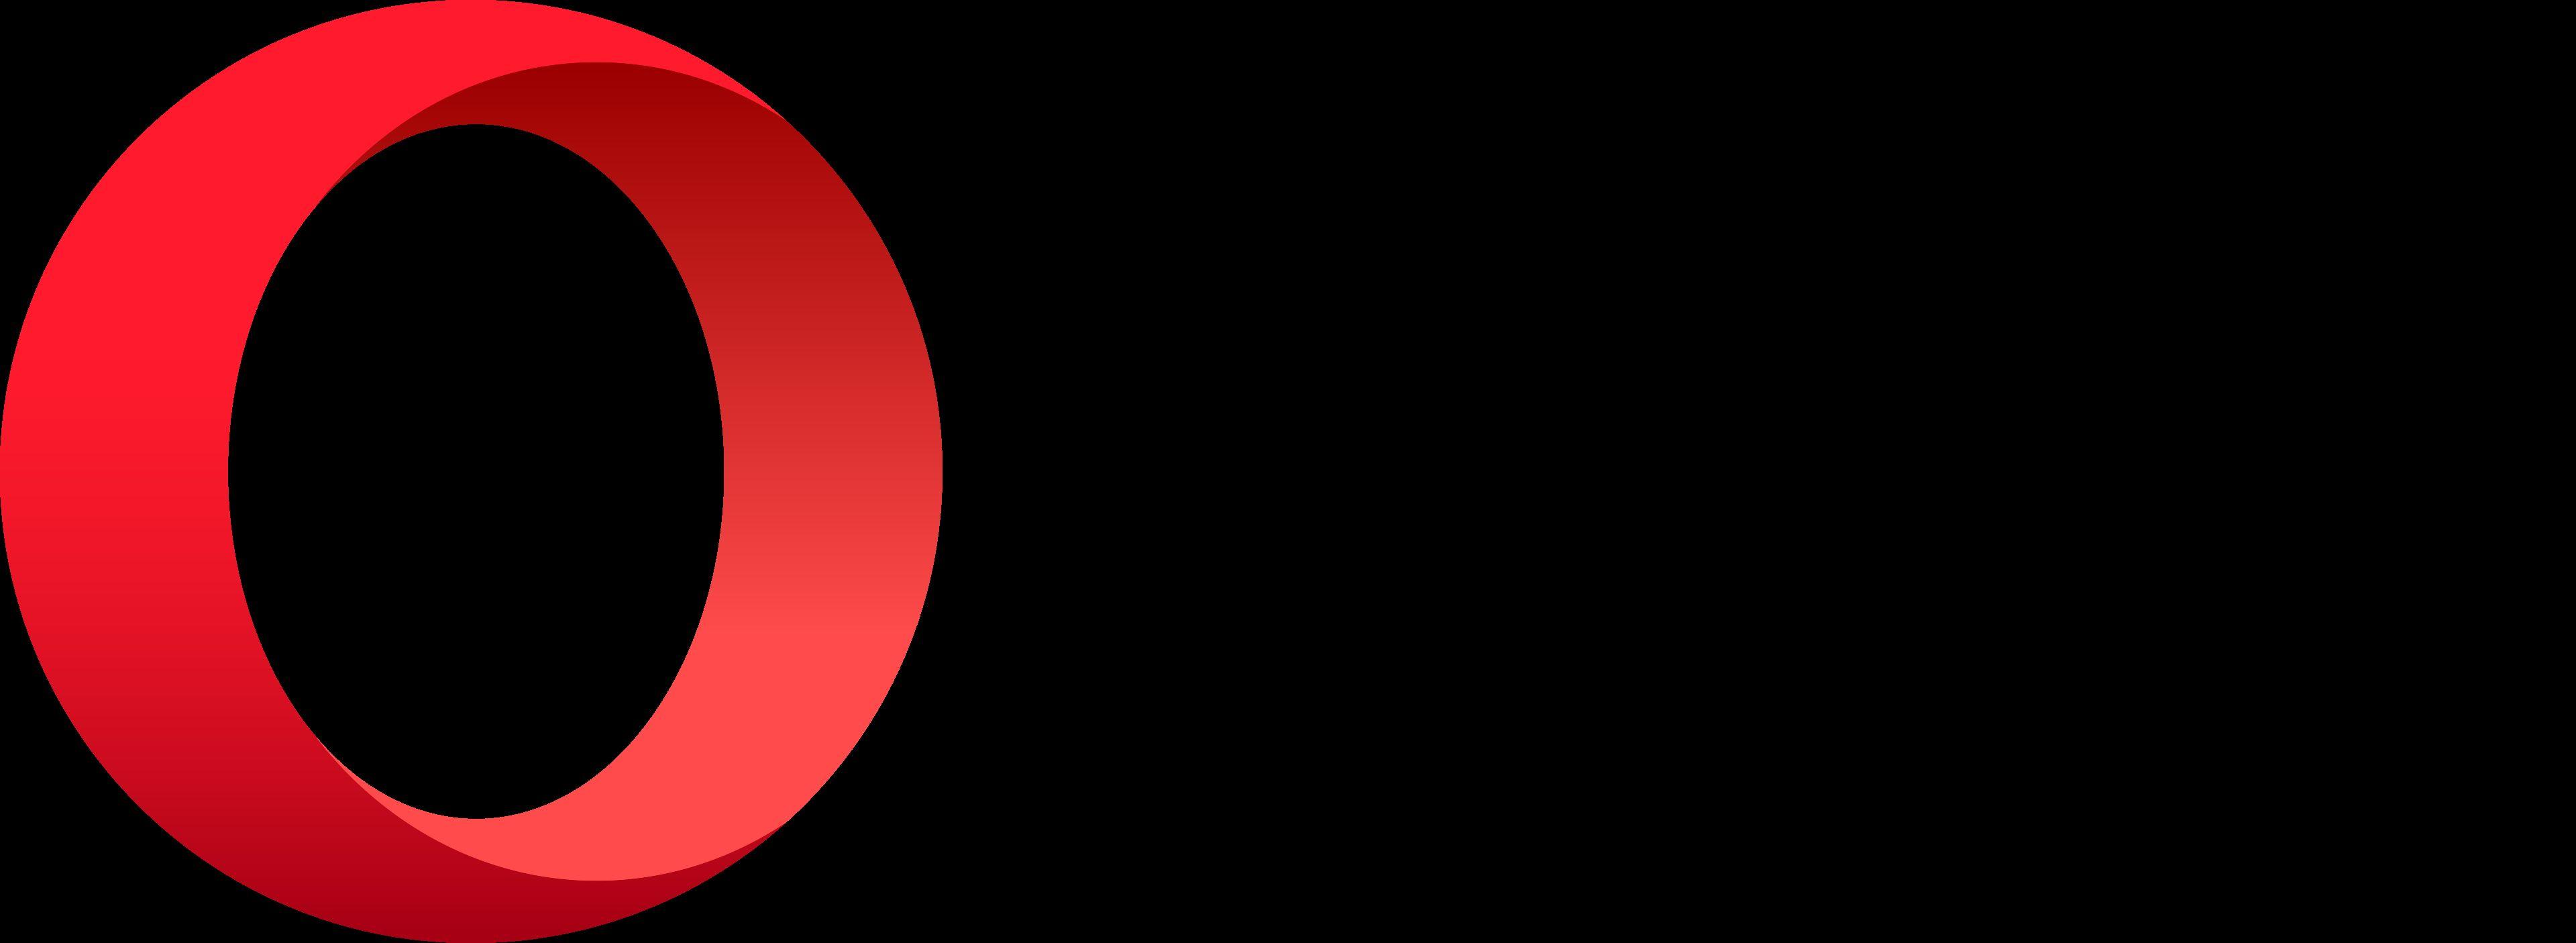 Opera Logo - Opera gets acquisition offer from Chinese consortium that includes ...